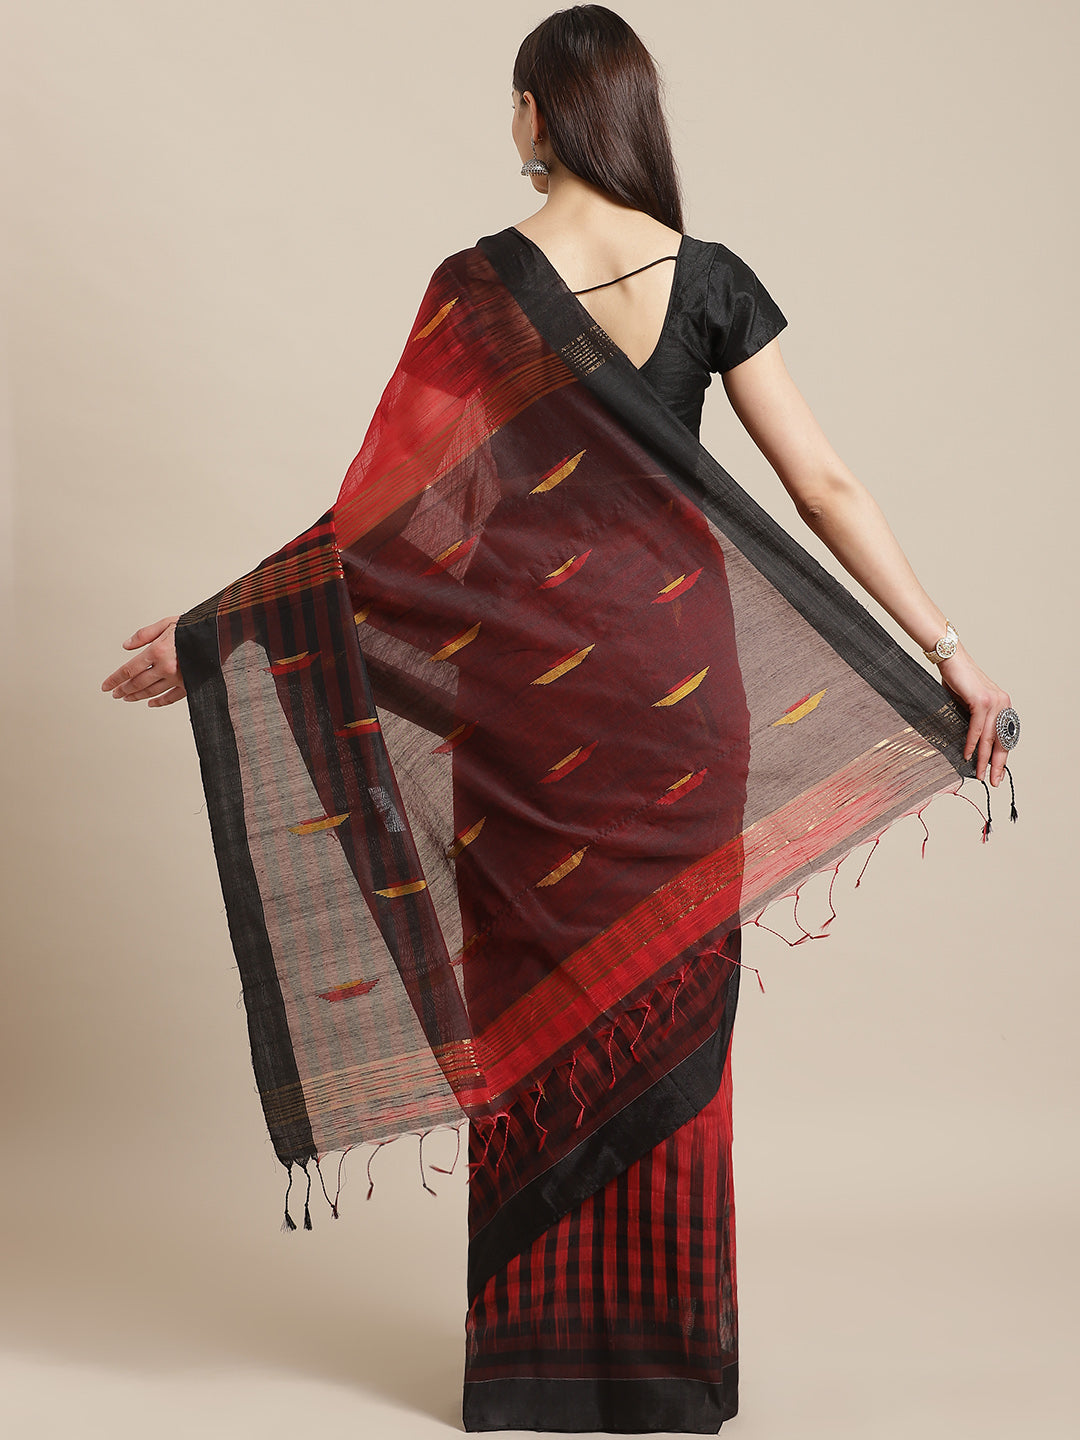 Red and Black, Kalakari India Cotton Silk Red Hand crafted saree with blouse SHBESA0009-Saree-Kalakari India-SHBESA0009-Bengal, Cotton, Geographical Indication, Hand Crafted, Heritage Prints, Ikkat, Natural Dyes, Red, Sarees, Sustainable Fabrics, Woven, Yellow-[Linen,Ethnic,wear,Fashionista,Handloom,Handicraft,Indigo,blockprint,block,print,Cotton,Chanderi,Blue, latest,classy,party,bollywood,trendy,summer,style,traditional,formal,elegant,unique,style,hand,block,print, dabu,booti,gift,present,glam